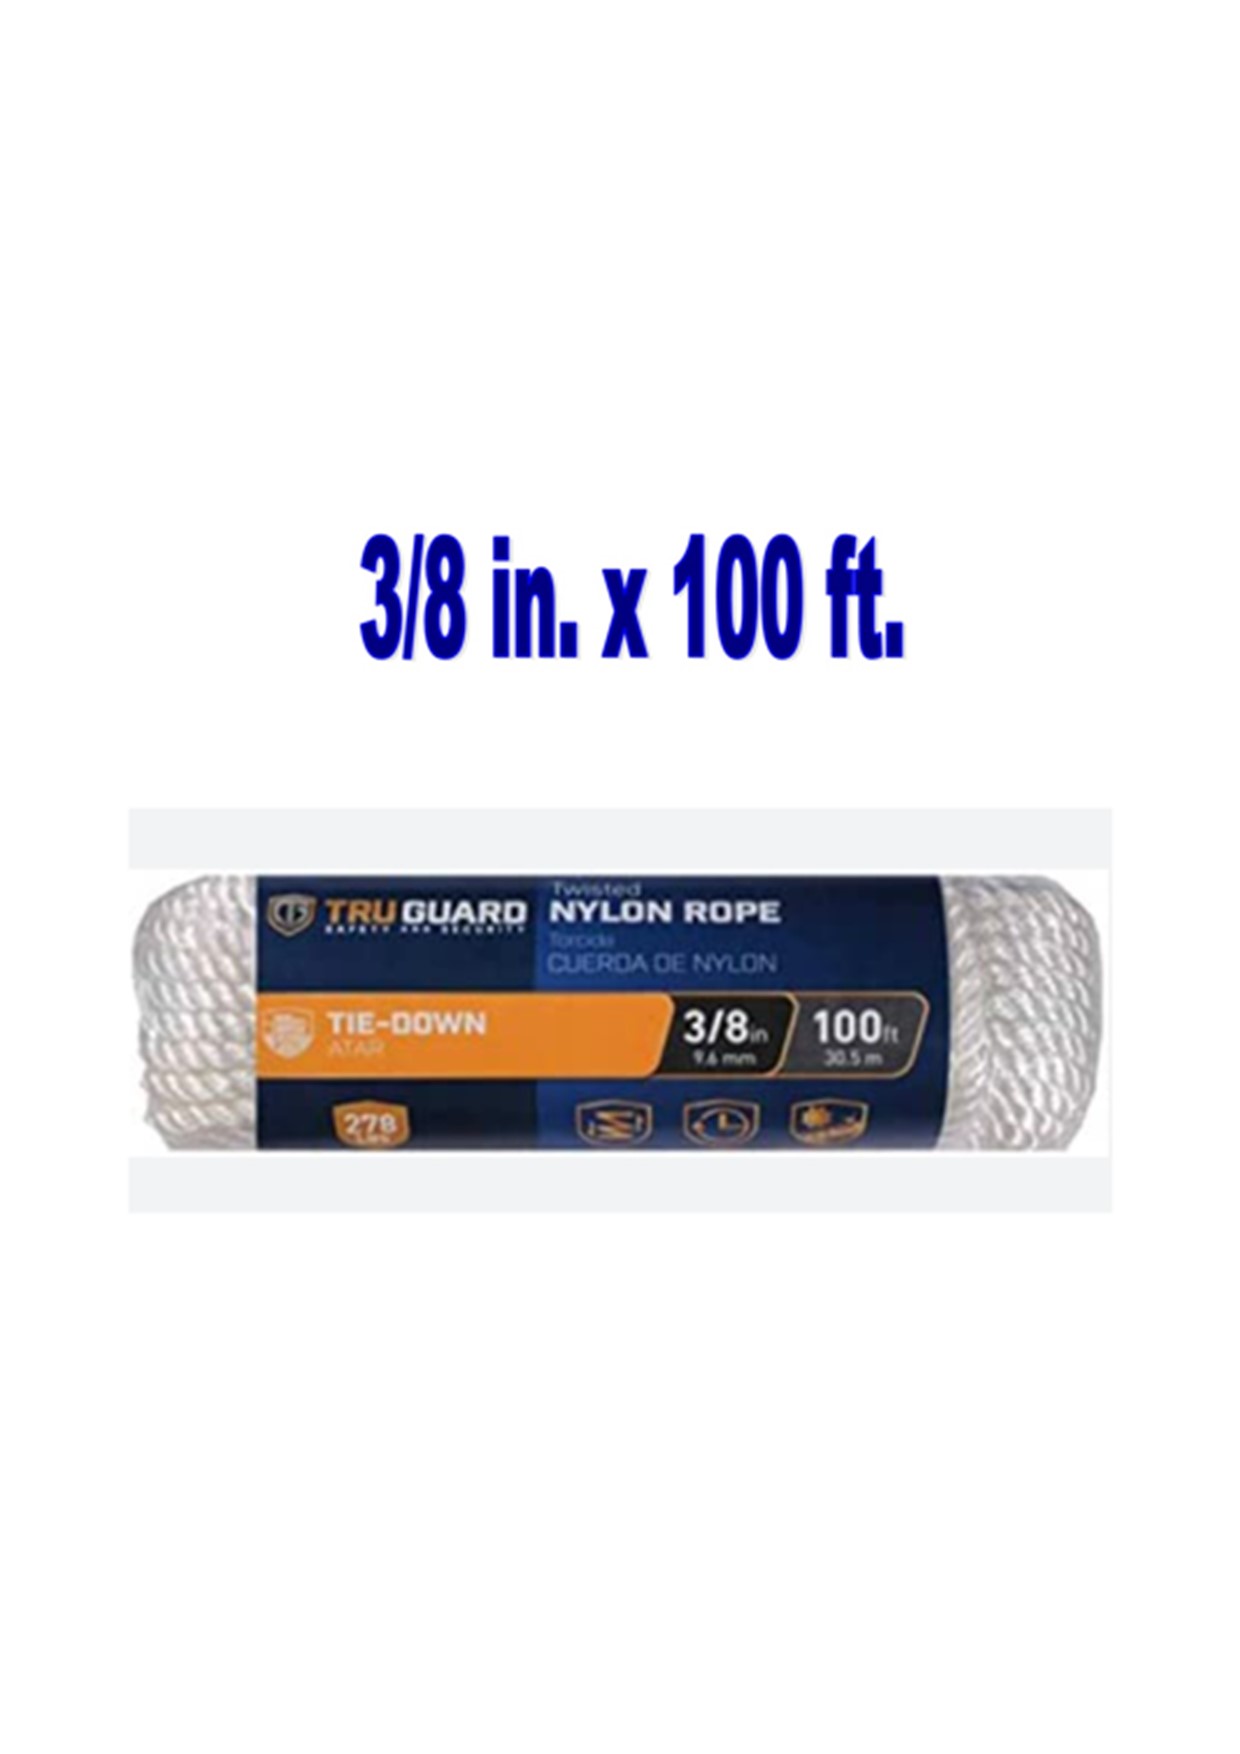 White 3/8 in. X 100 ft. Twisted Nylon Rope Load Limit 280 lb. - H110167422